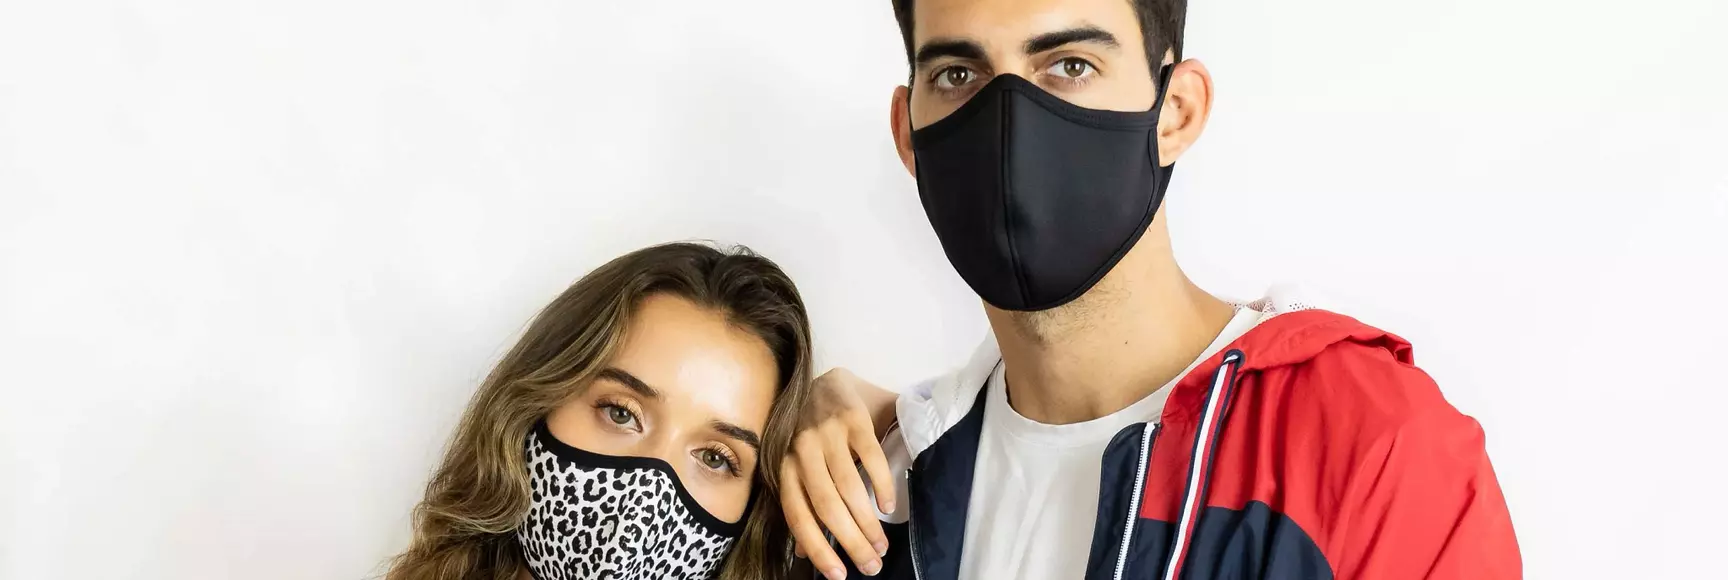 Models wearing Texollini T19 Performance Face Masks made with LYCRA® fiber for a snug, comfortable fit.